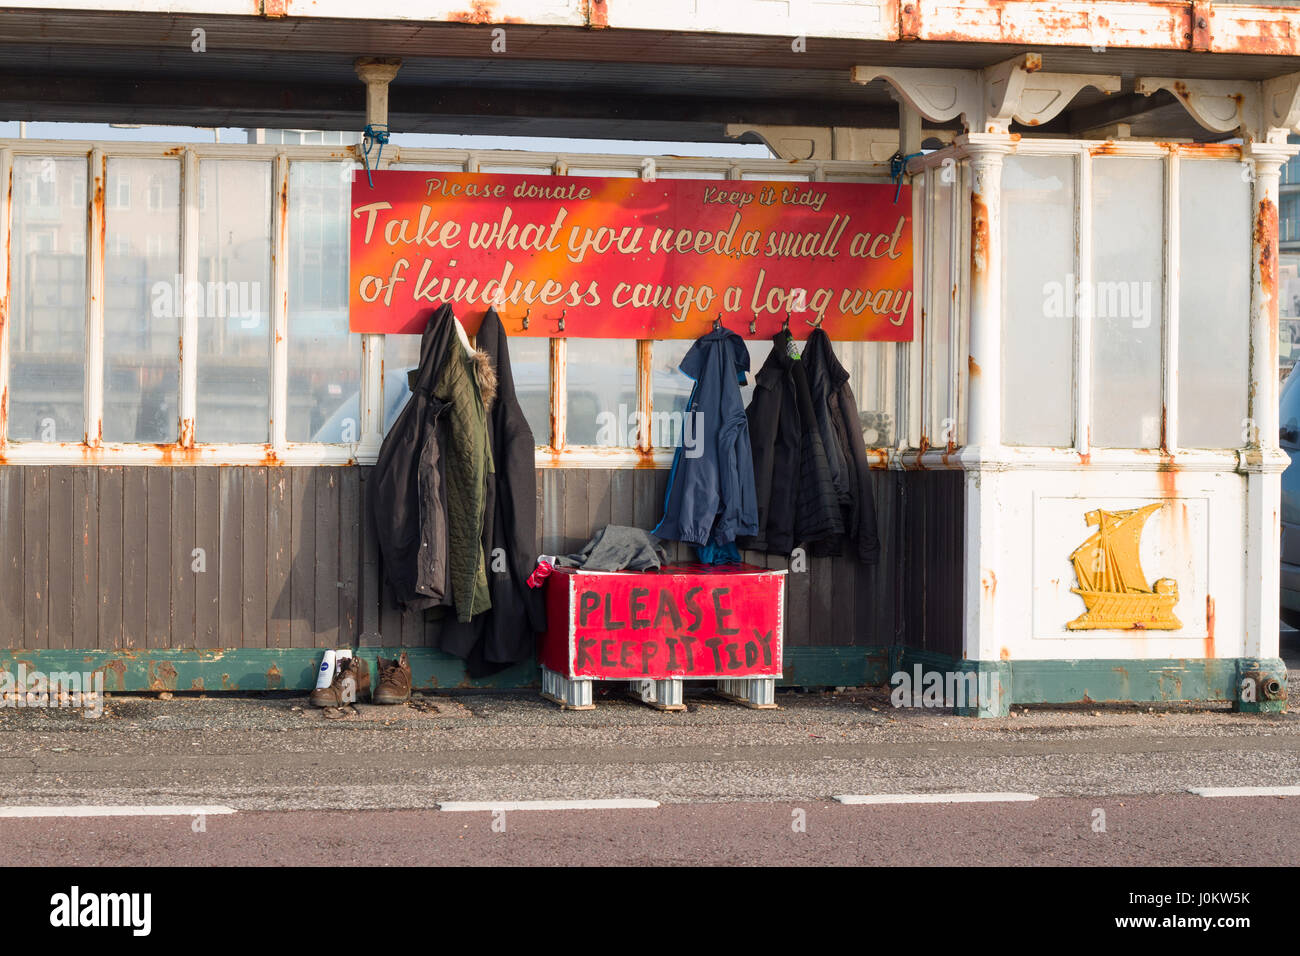 Seaside shelter on Hove promenade, with donated clothes free for homeless people to take. Stock Photo